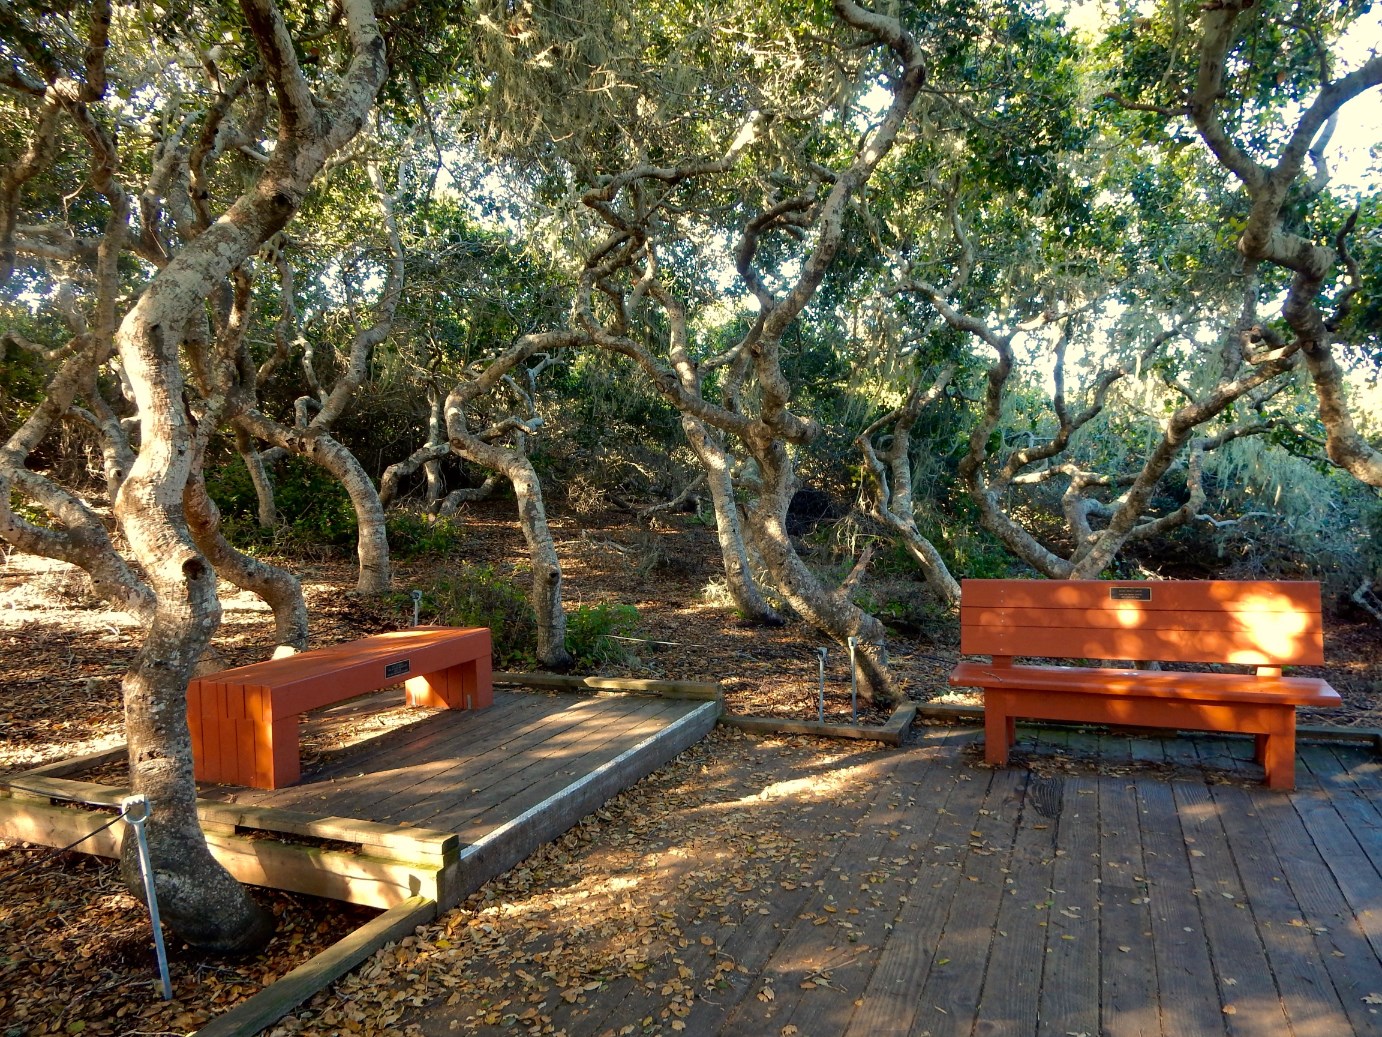 A place to sit and ponder in the Elfin Forest. Photo by Lynn Stafford